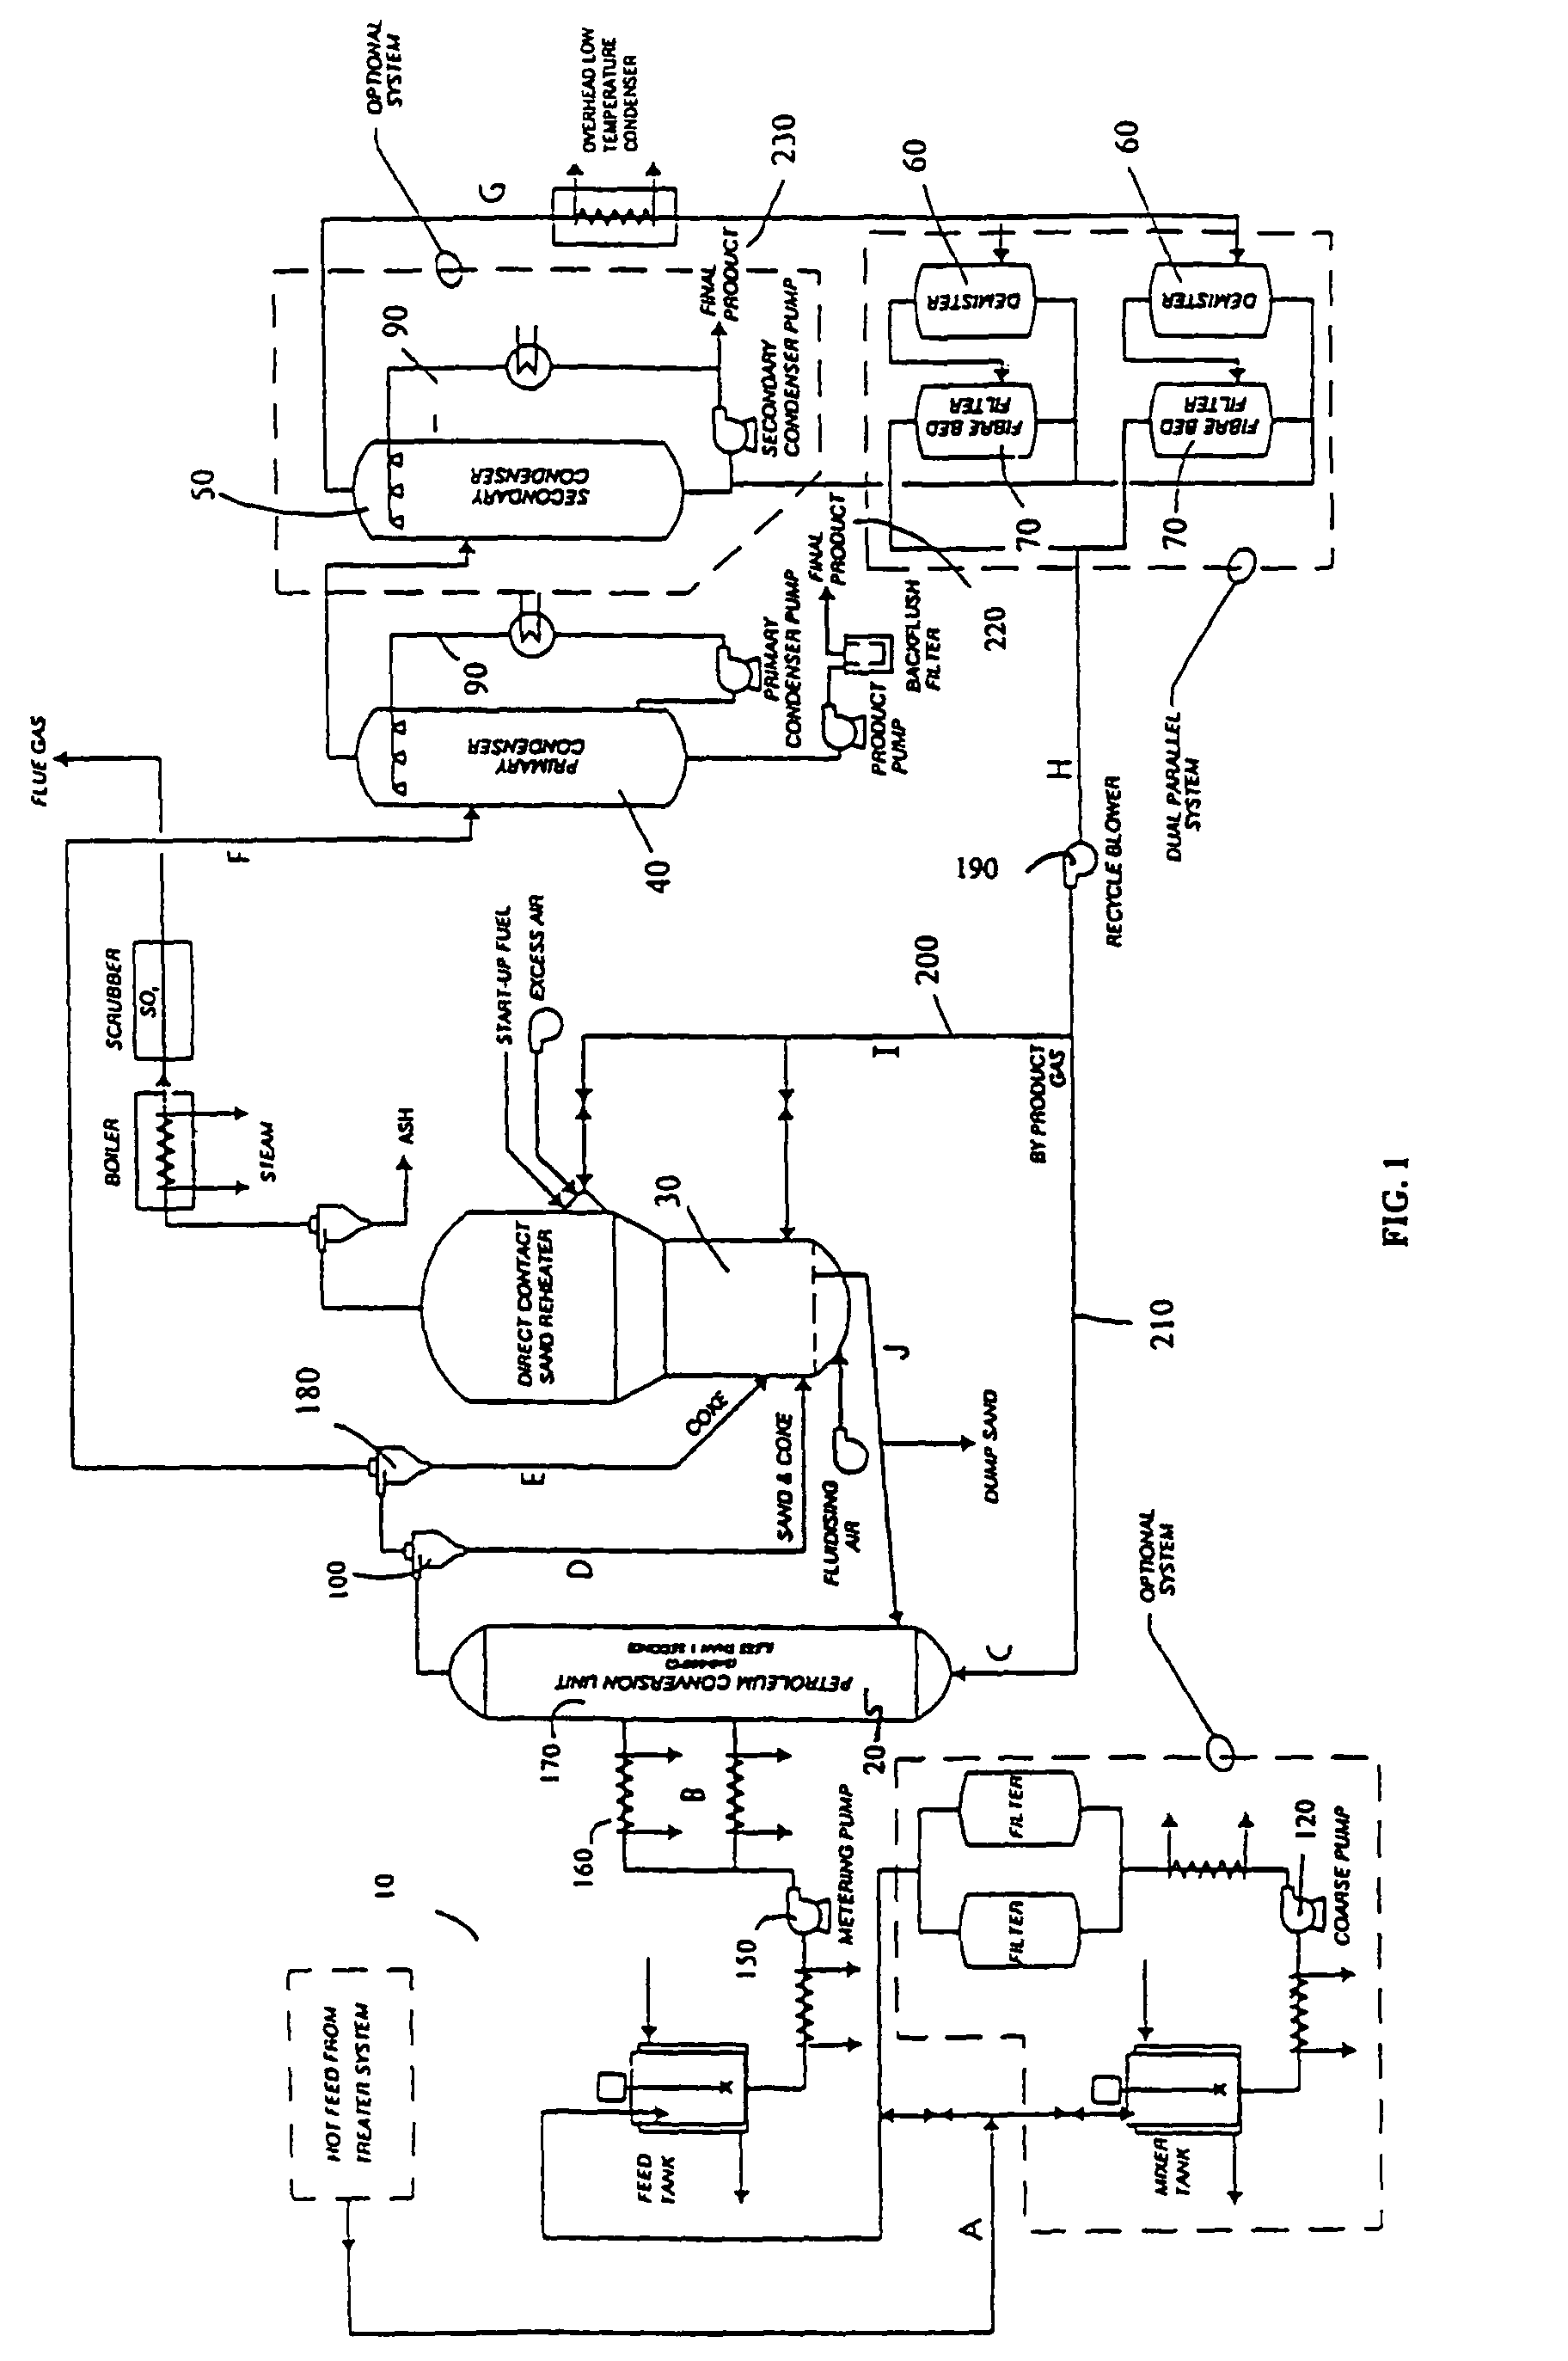 Rapid thermal processing of heavy hydrocarbon feedstocks